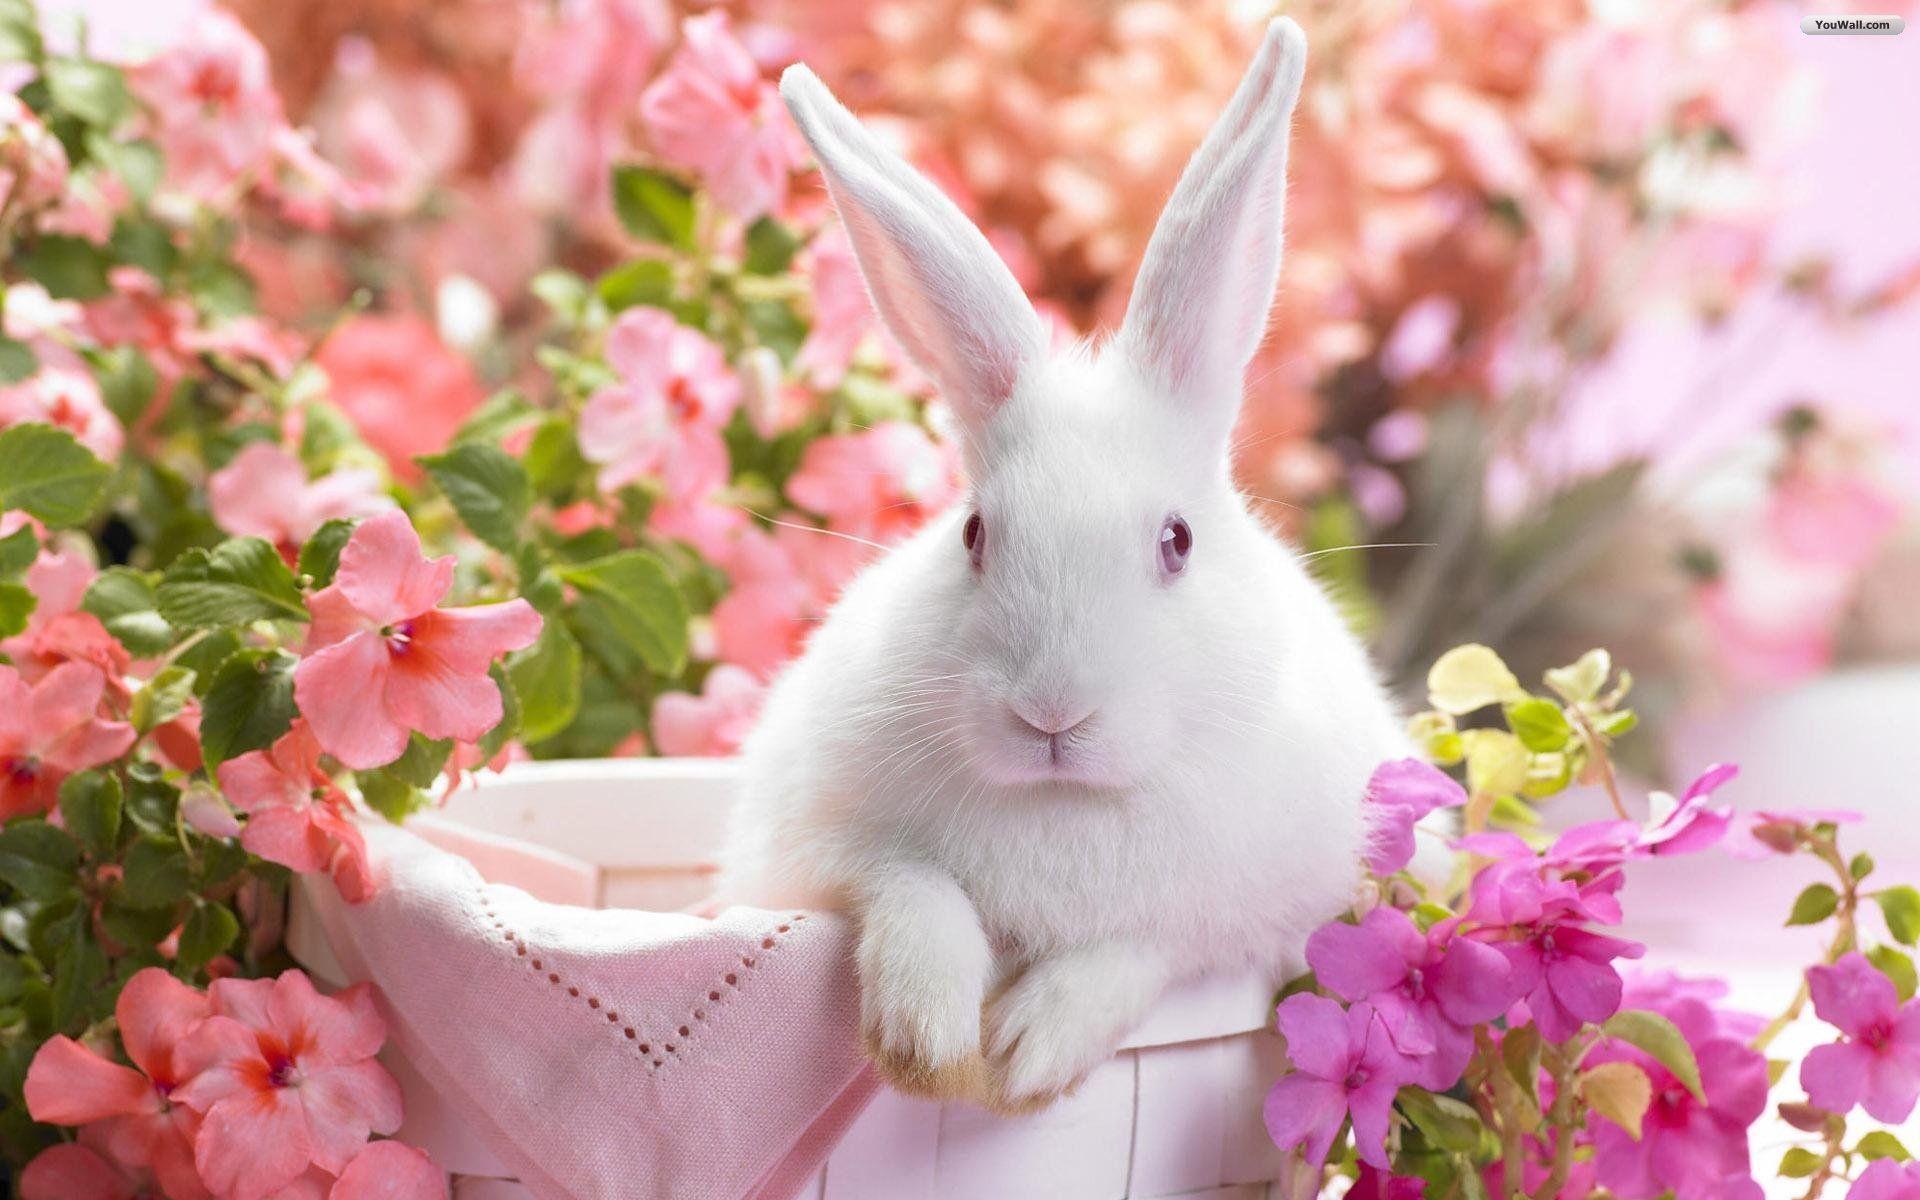 Wallpapers For > Wallpapers Of Cute Rabbits